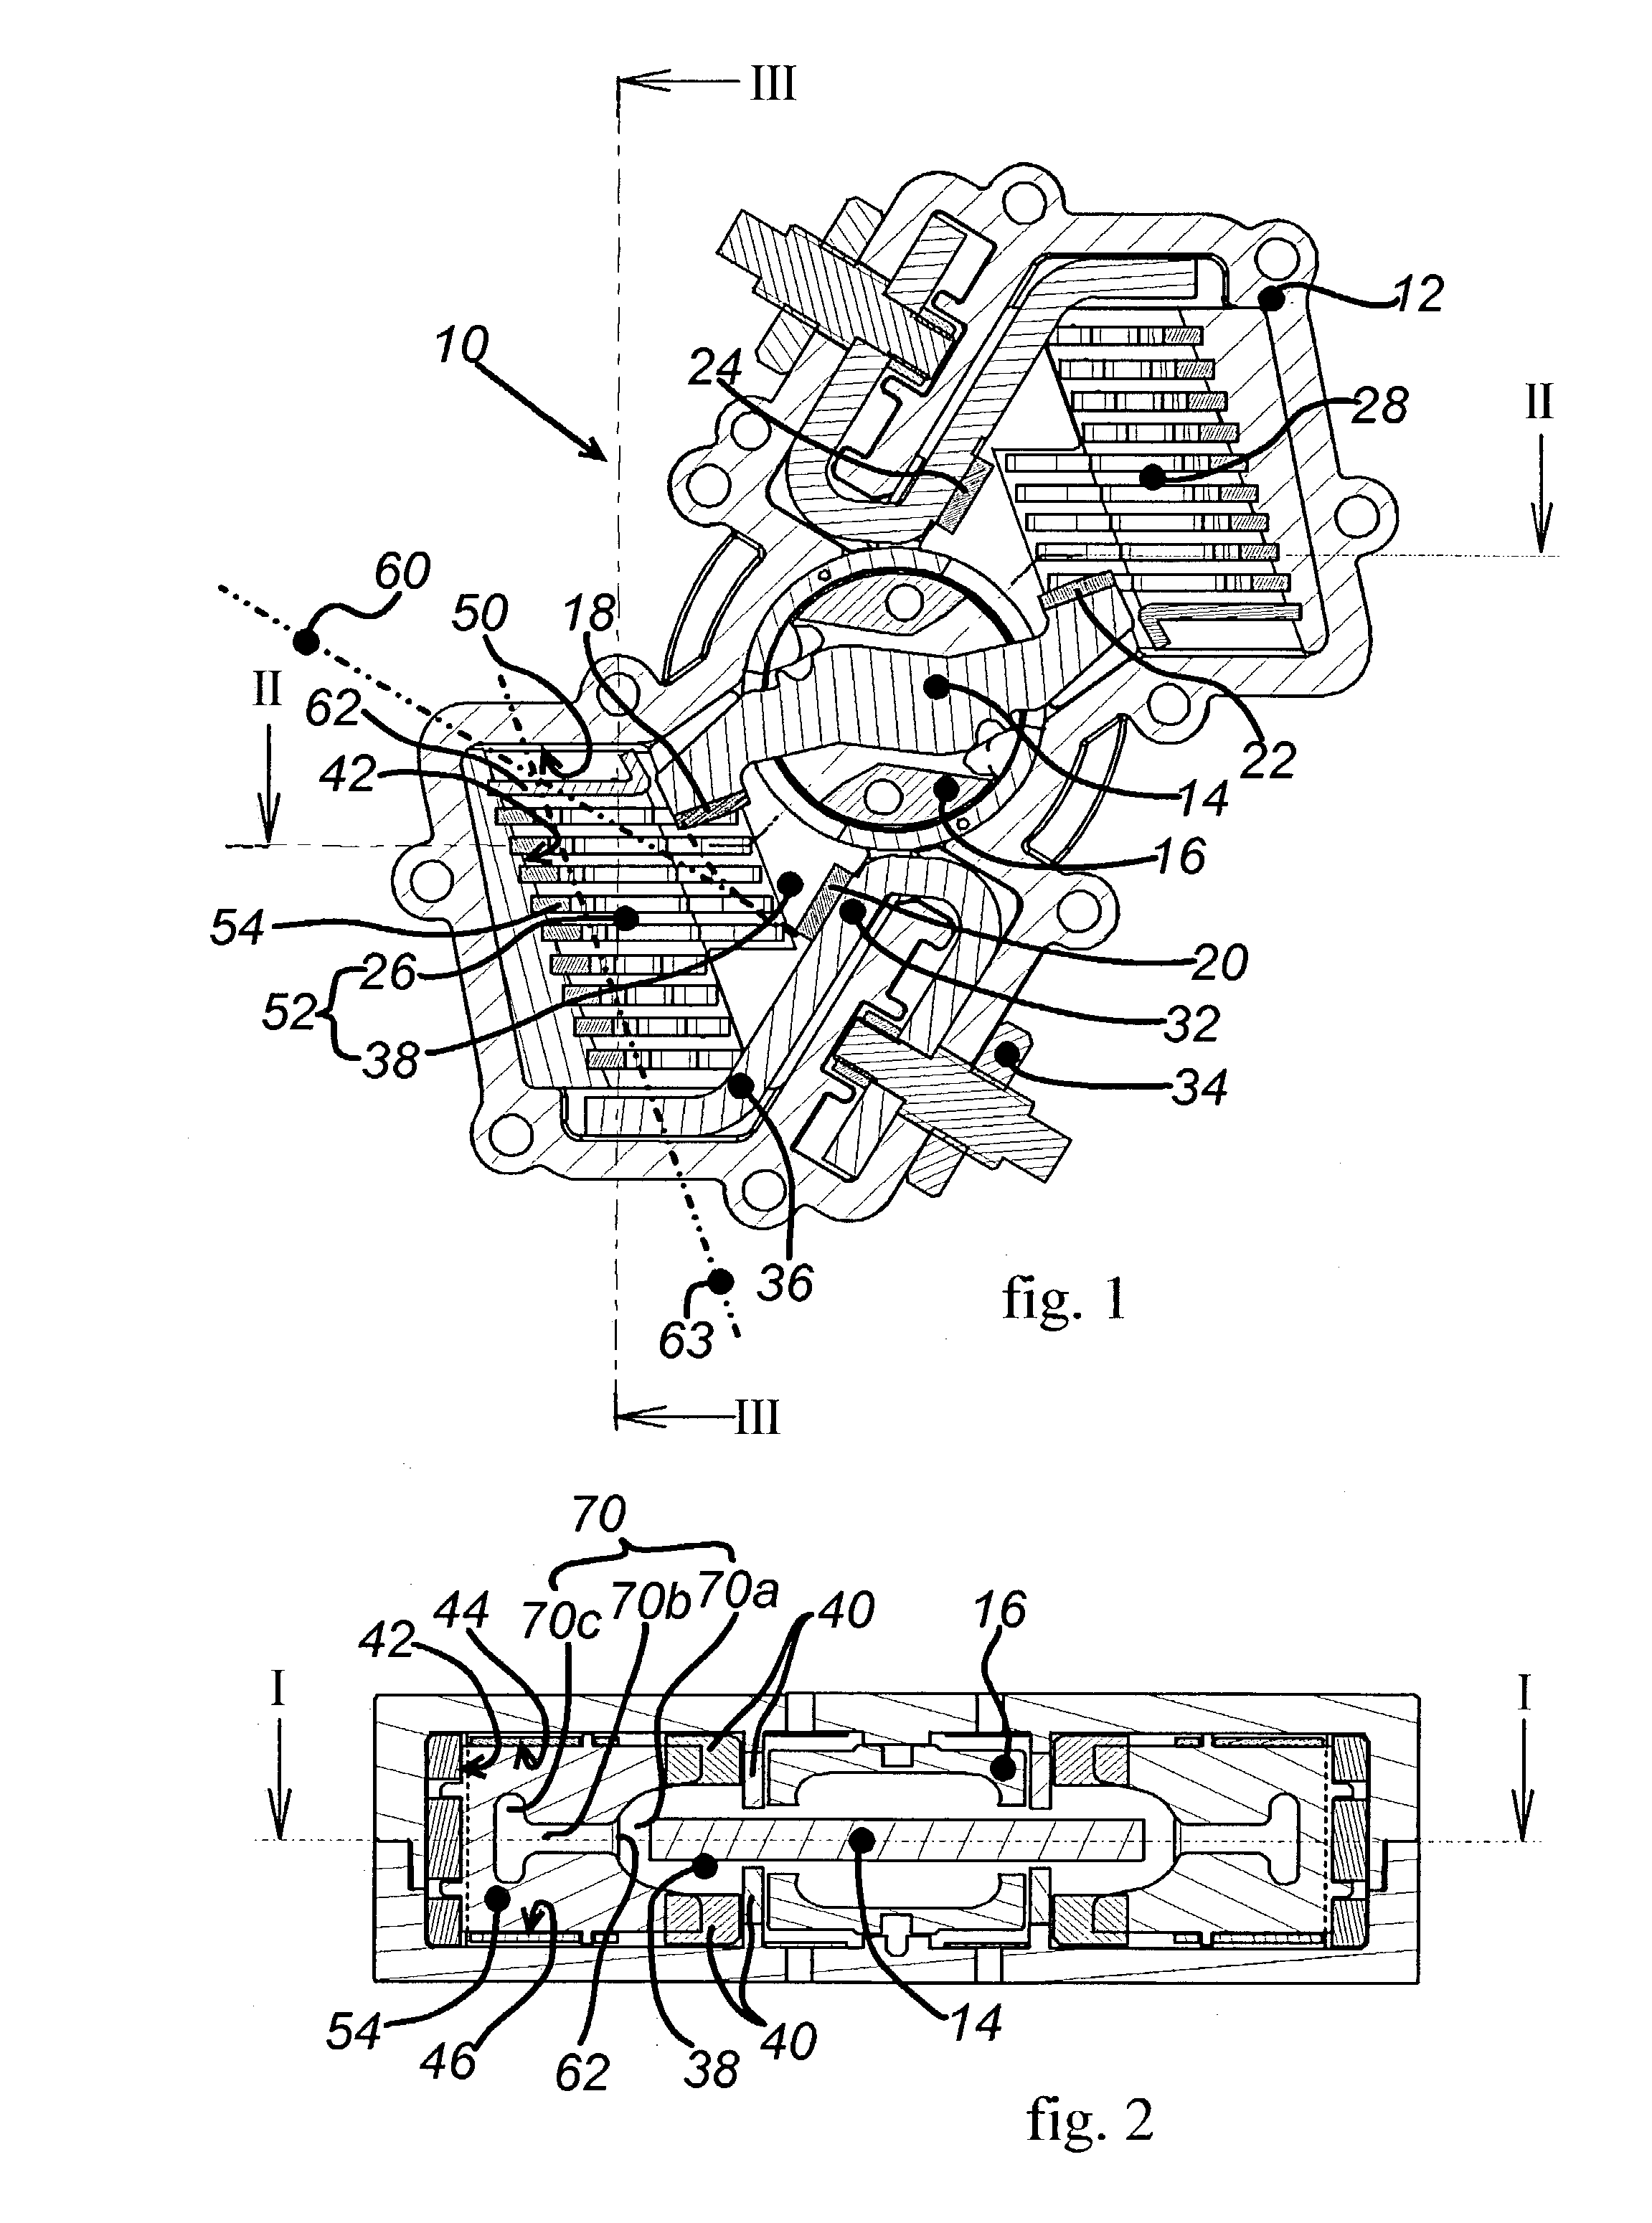 Electrical switchgear apparatus comprising an arc extinguishing chamber equipped with deionizing fins